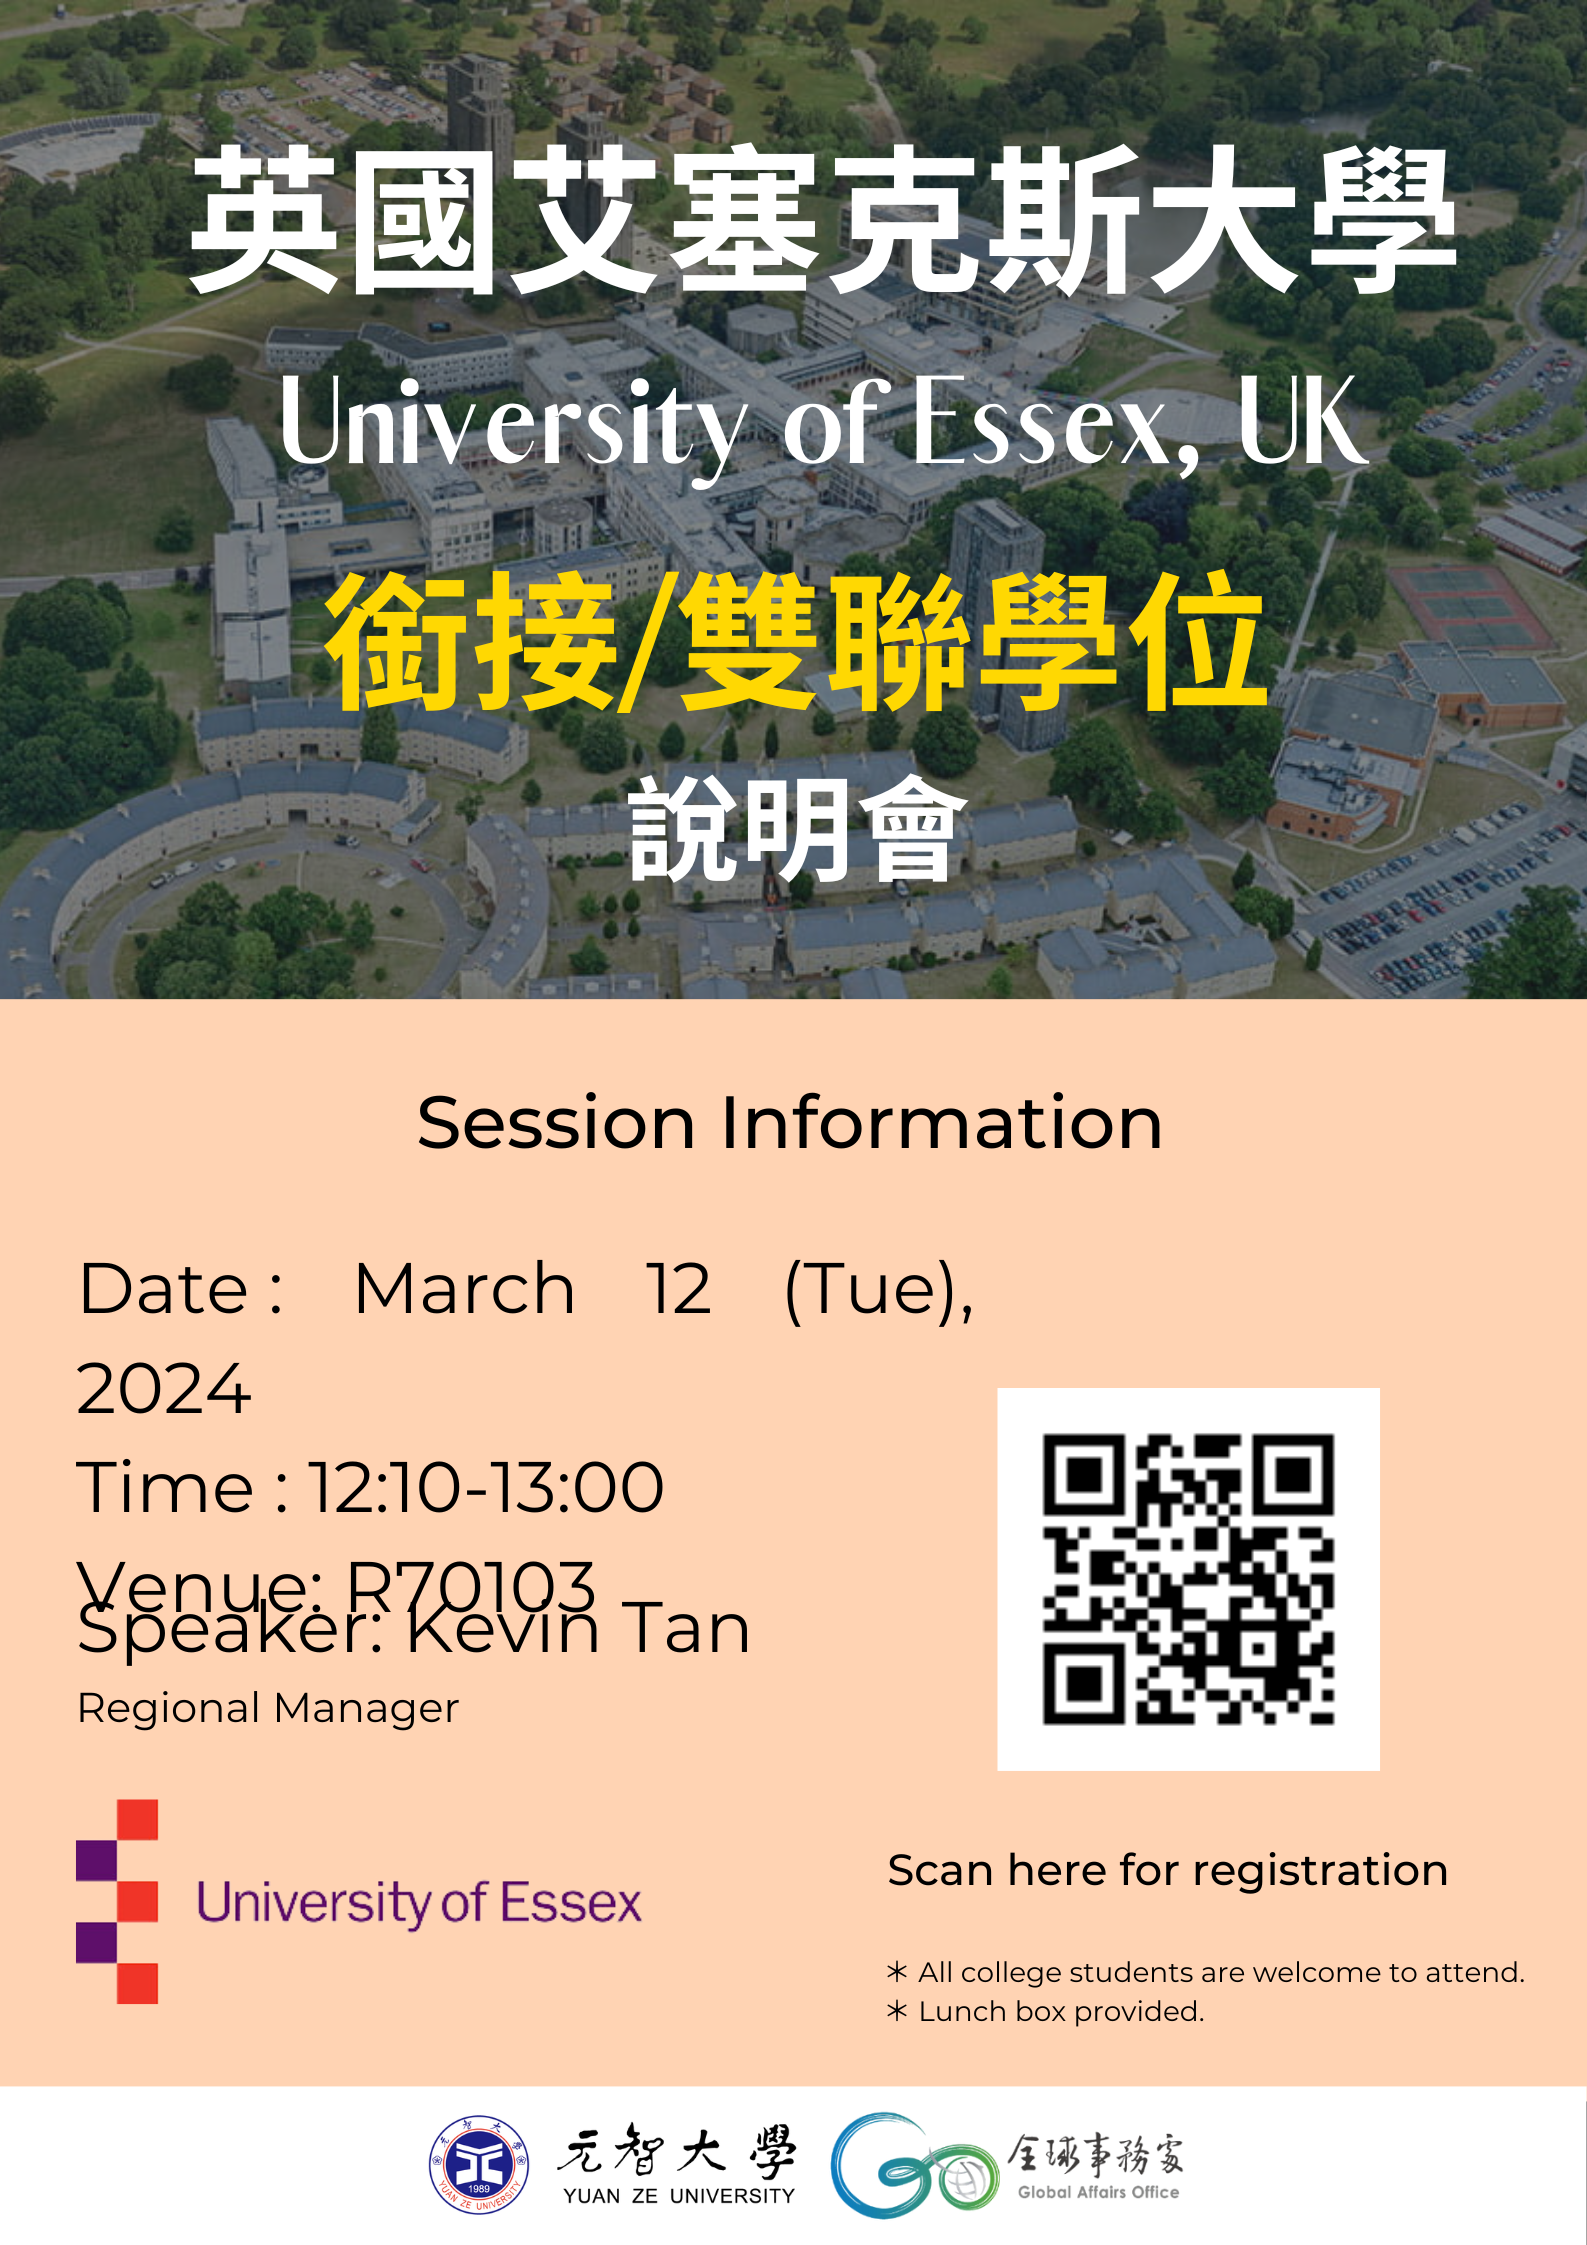 Welcome to attend the study abroad info session with University of Essex, UK